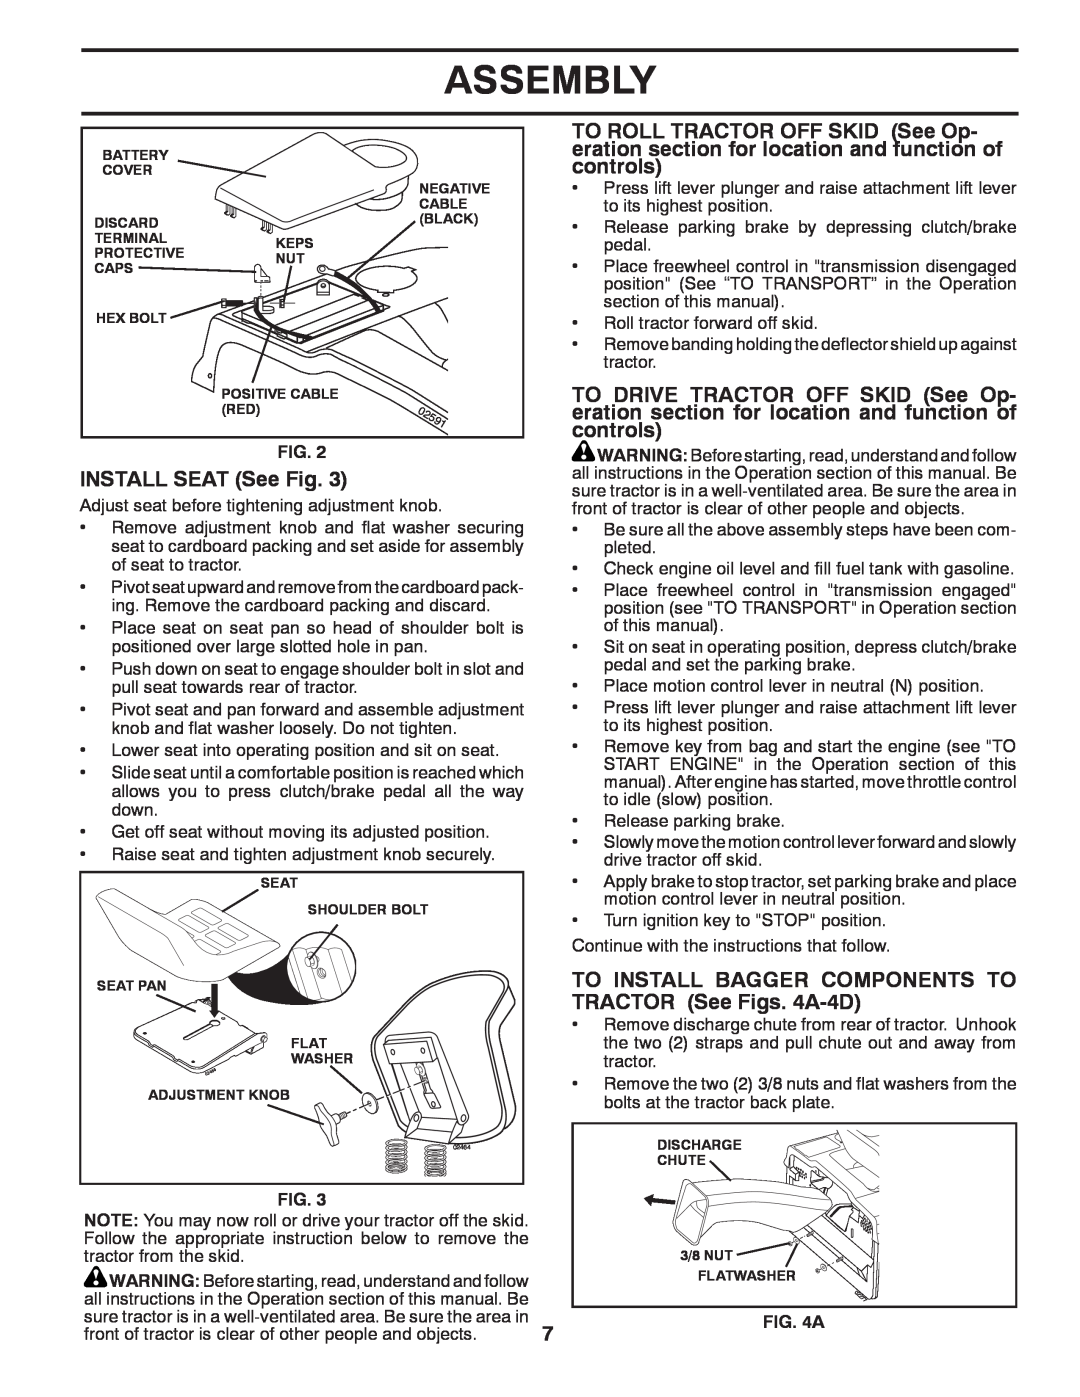 Husqvarna CTH2036 owner manual INSTALL SEAT See Fig, To Install Bagger Components To, TRACTOR See Figs. 4A-4D, Assembly 